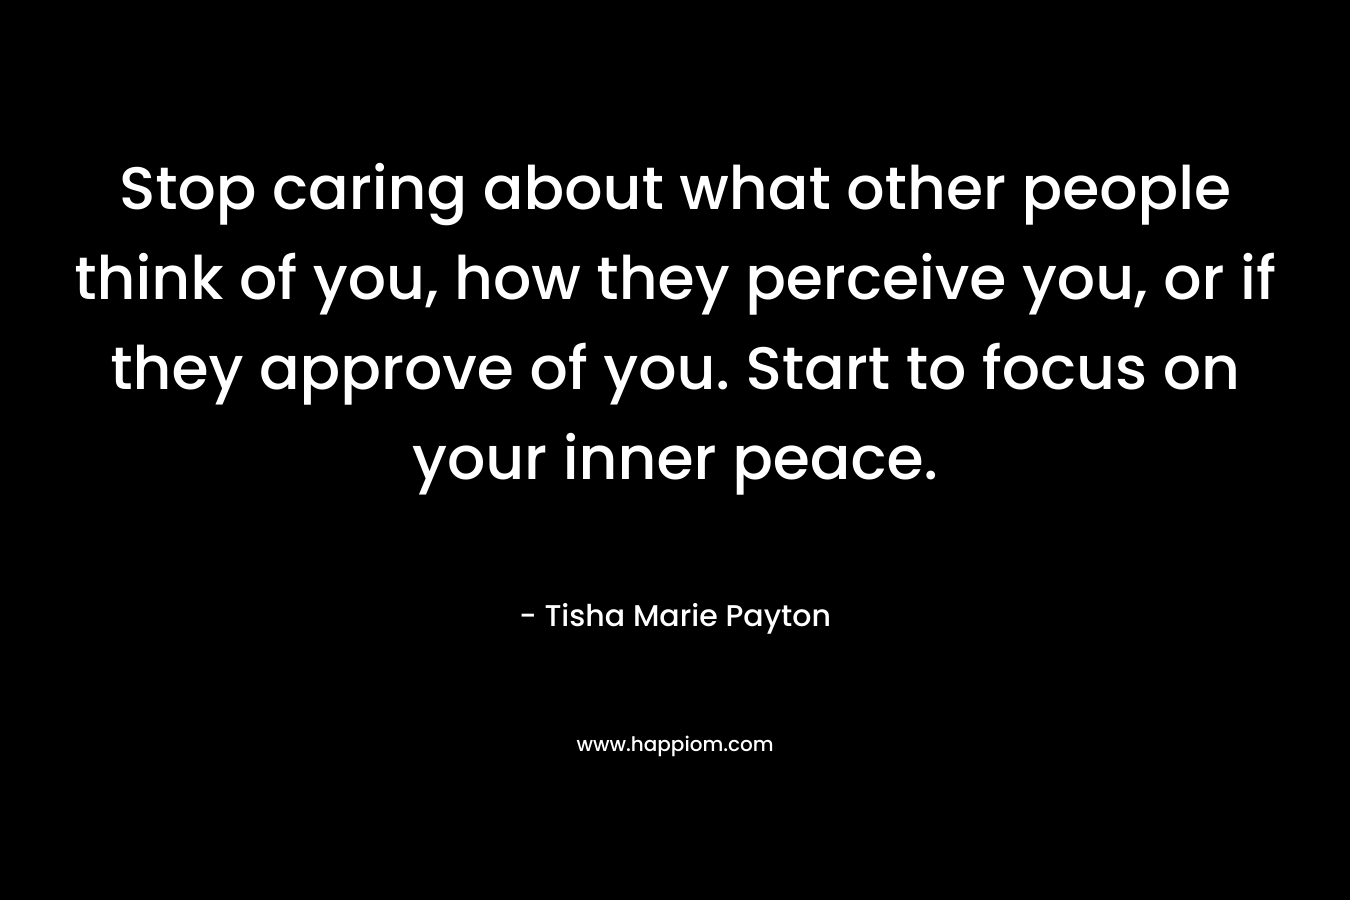 Stop caring about what other people think of you, how they perceive you, or if they approve of you. Start to focus on your inner peace. – Tisha Marie Payton